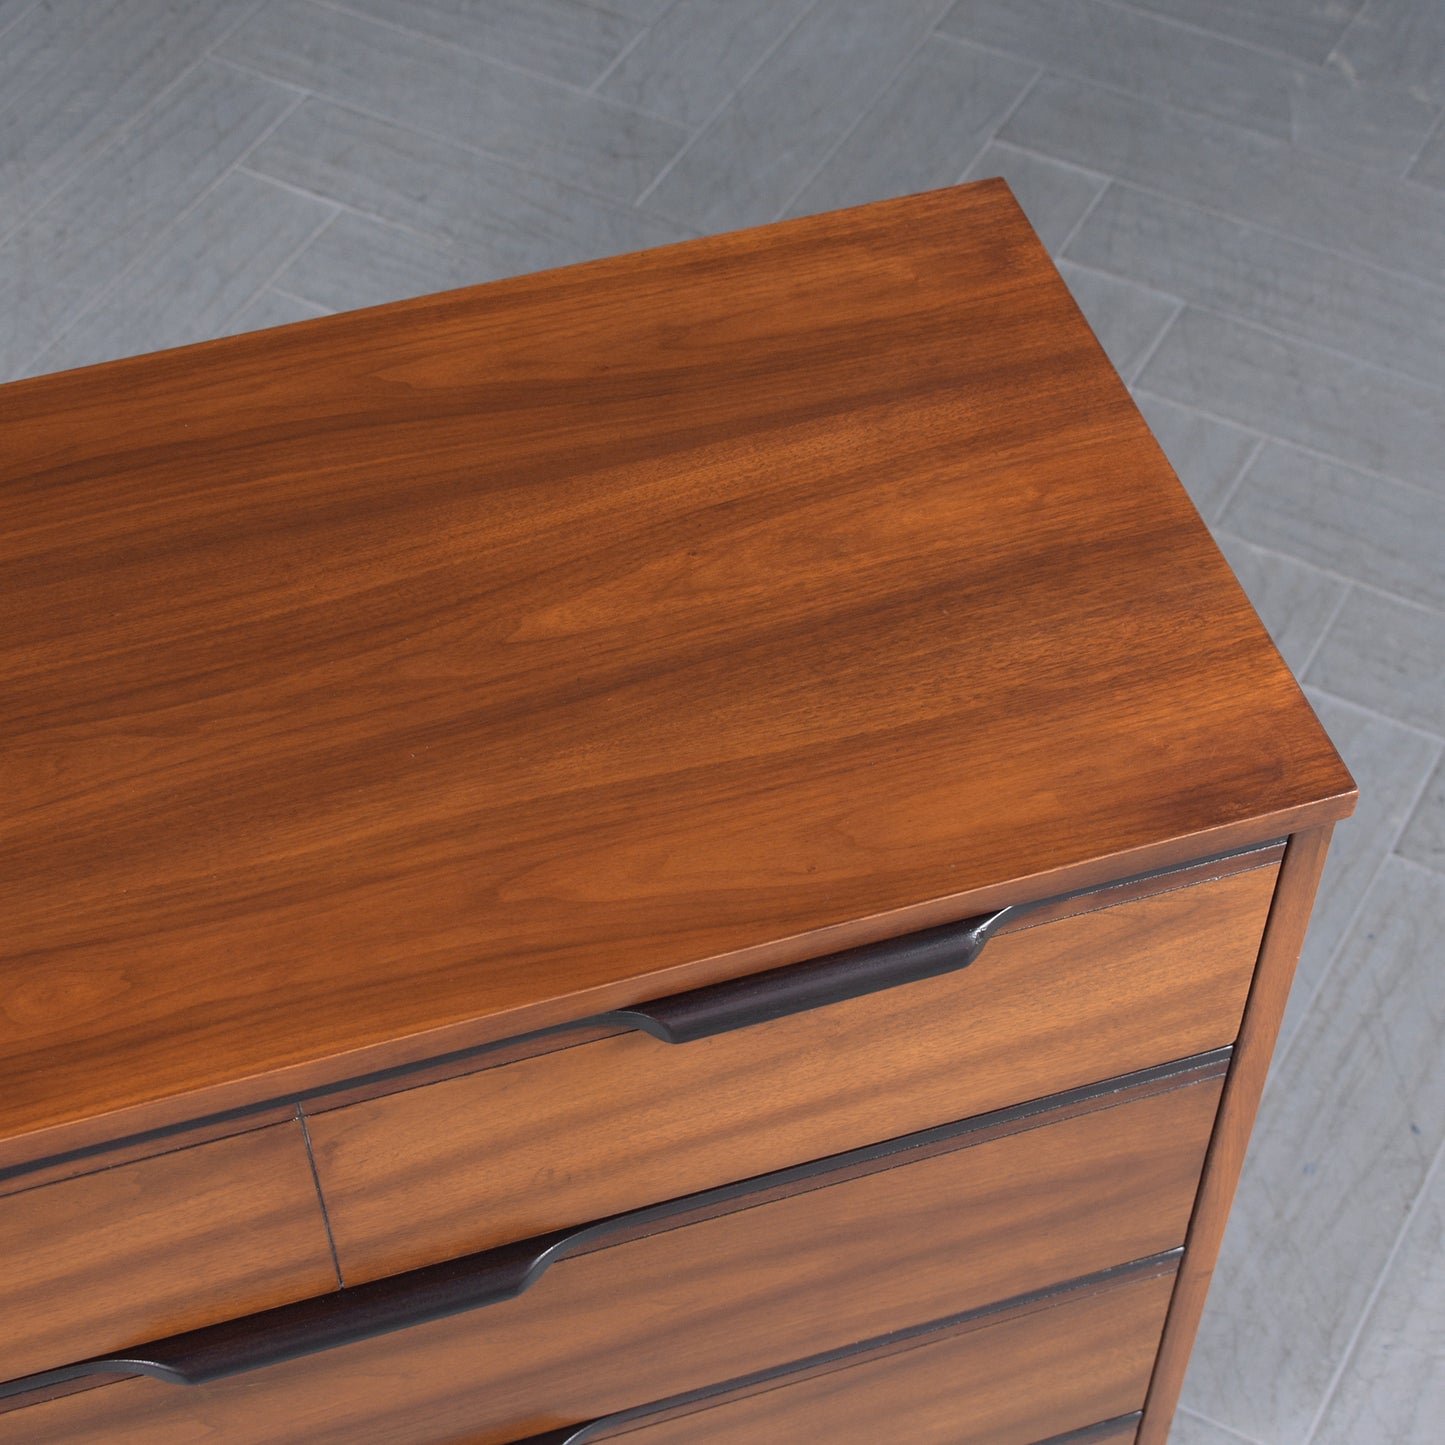 Handcrafted Modern Walnut Dresser: Two-Tone with High-Gloss Finish